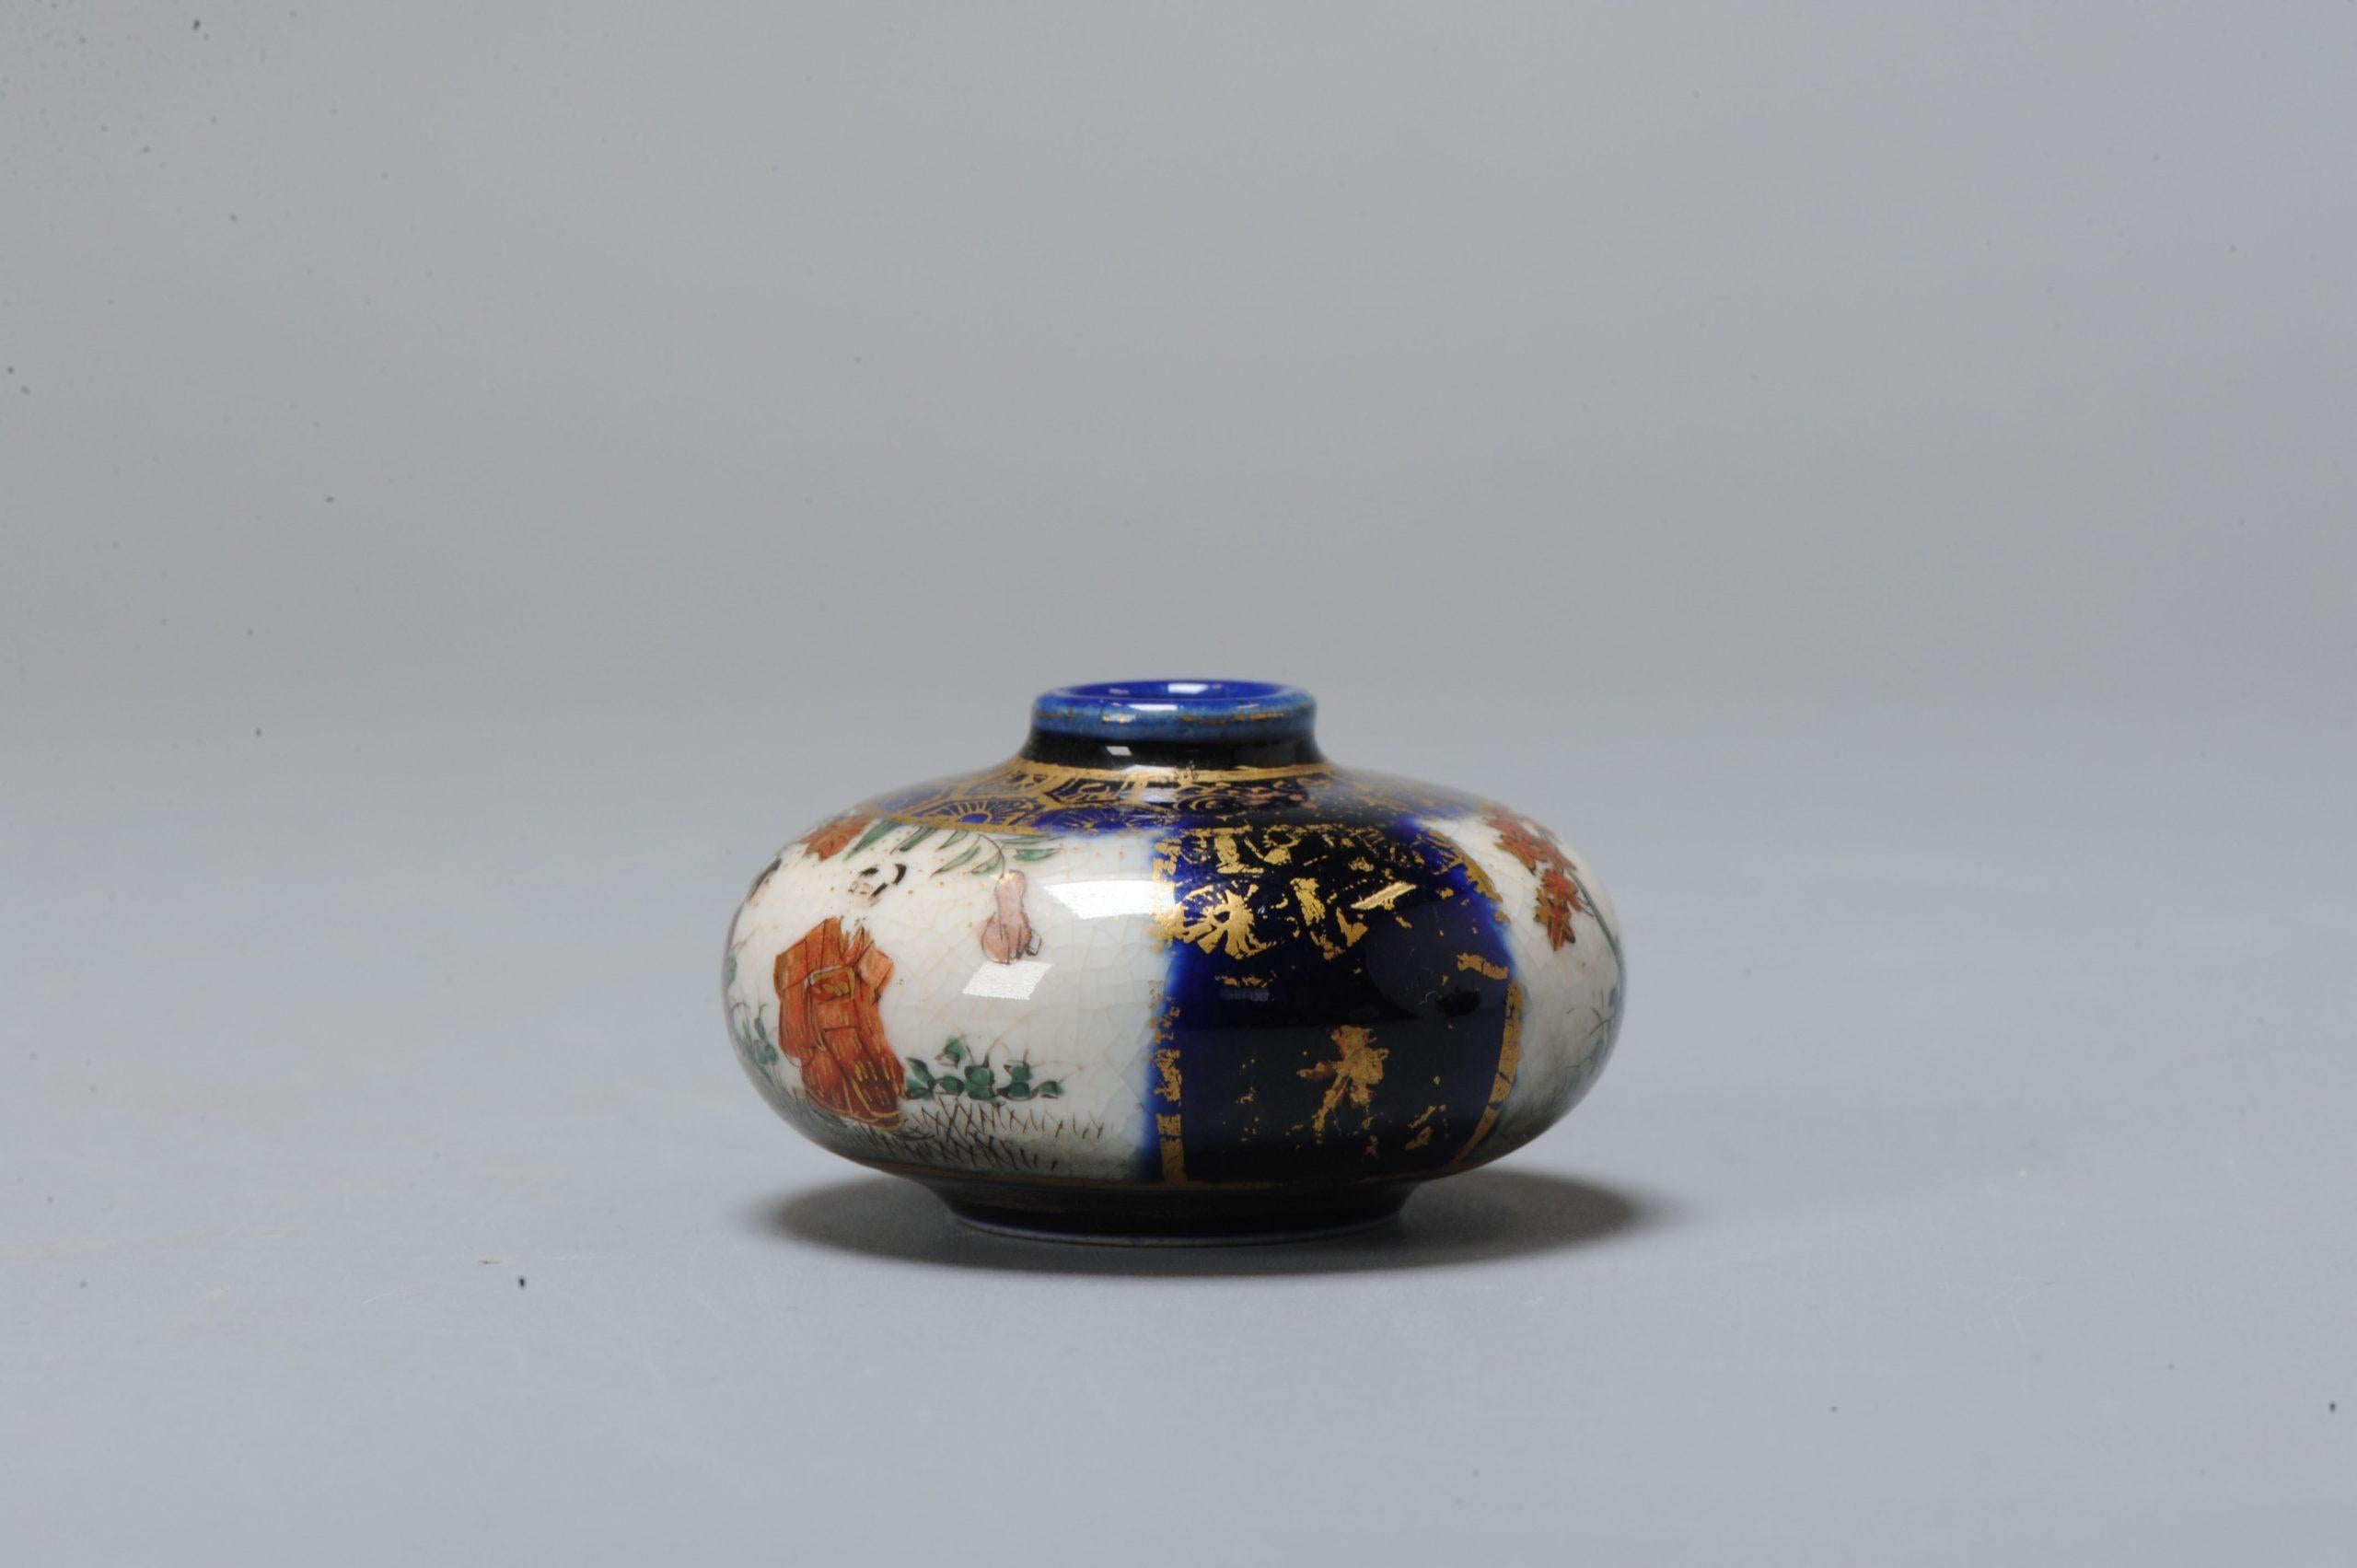 Fabulous Japanese earthenware Satsuma vase with nice decoration of flowers and figures decoration marked. Meiji period, 19th c

Lovely piece.

Additional information:
Material: Porcelain & Pottery
Type: Plates
Japanese Style: Satsuma
Region of